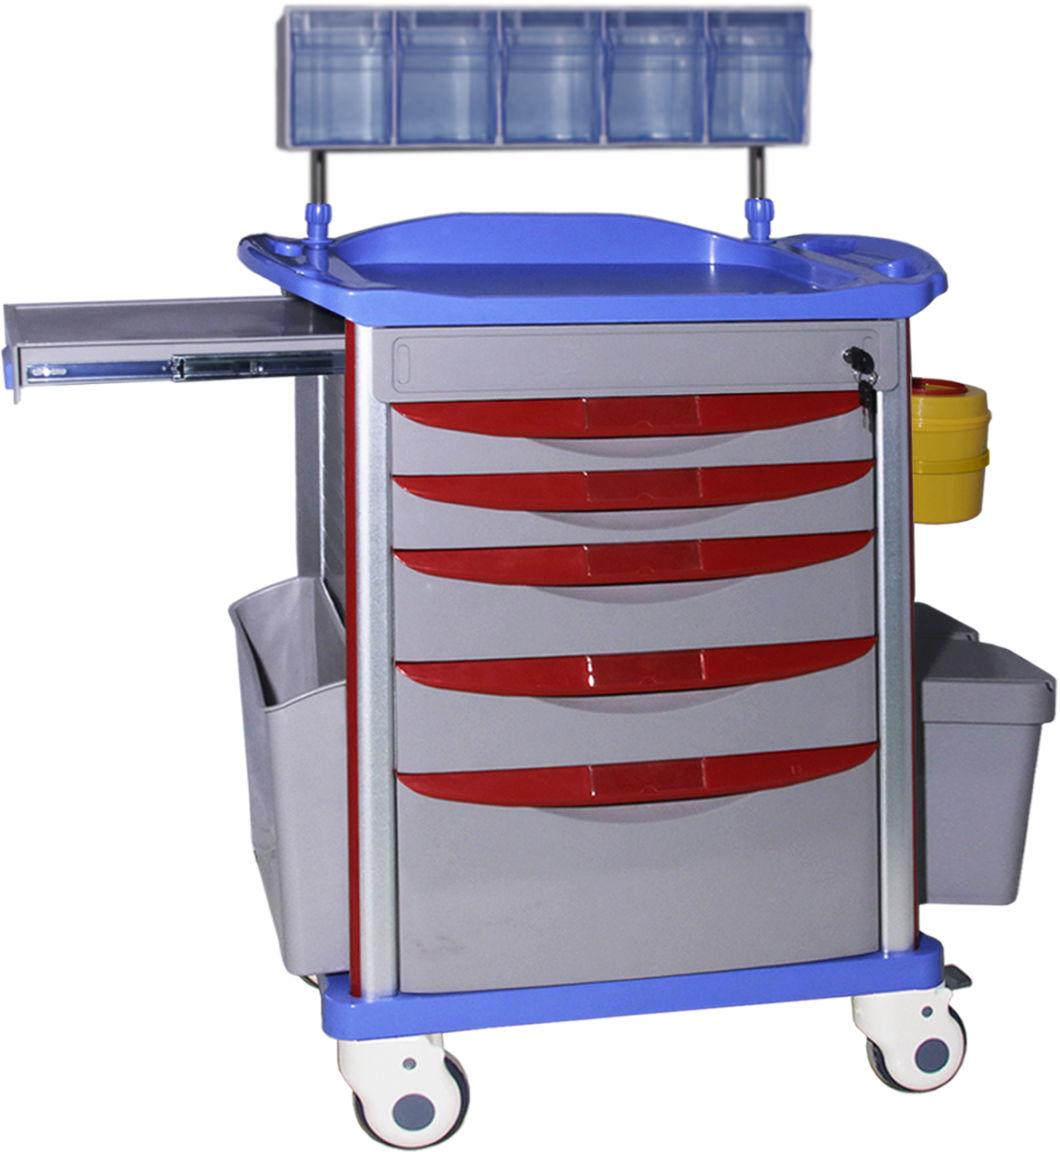 Mn-AC003 Hospital Medical Furniture Emergency Cart ABS Plastic Treatment Trolley with Drawers Wheels